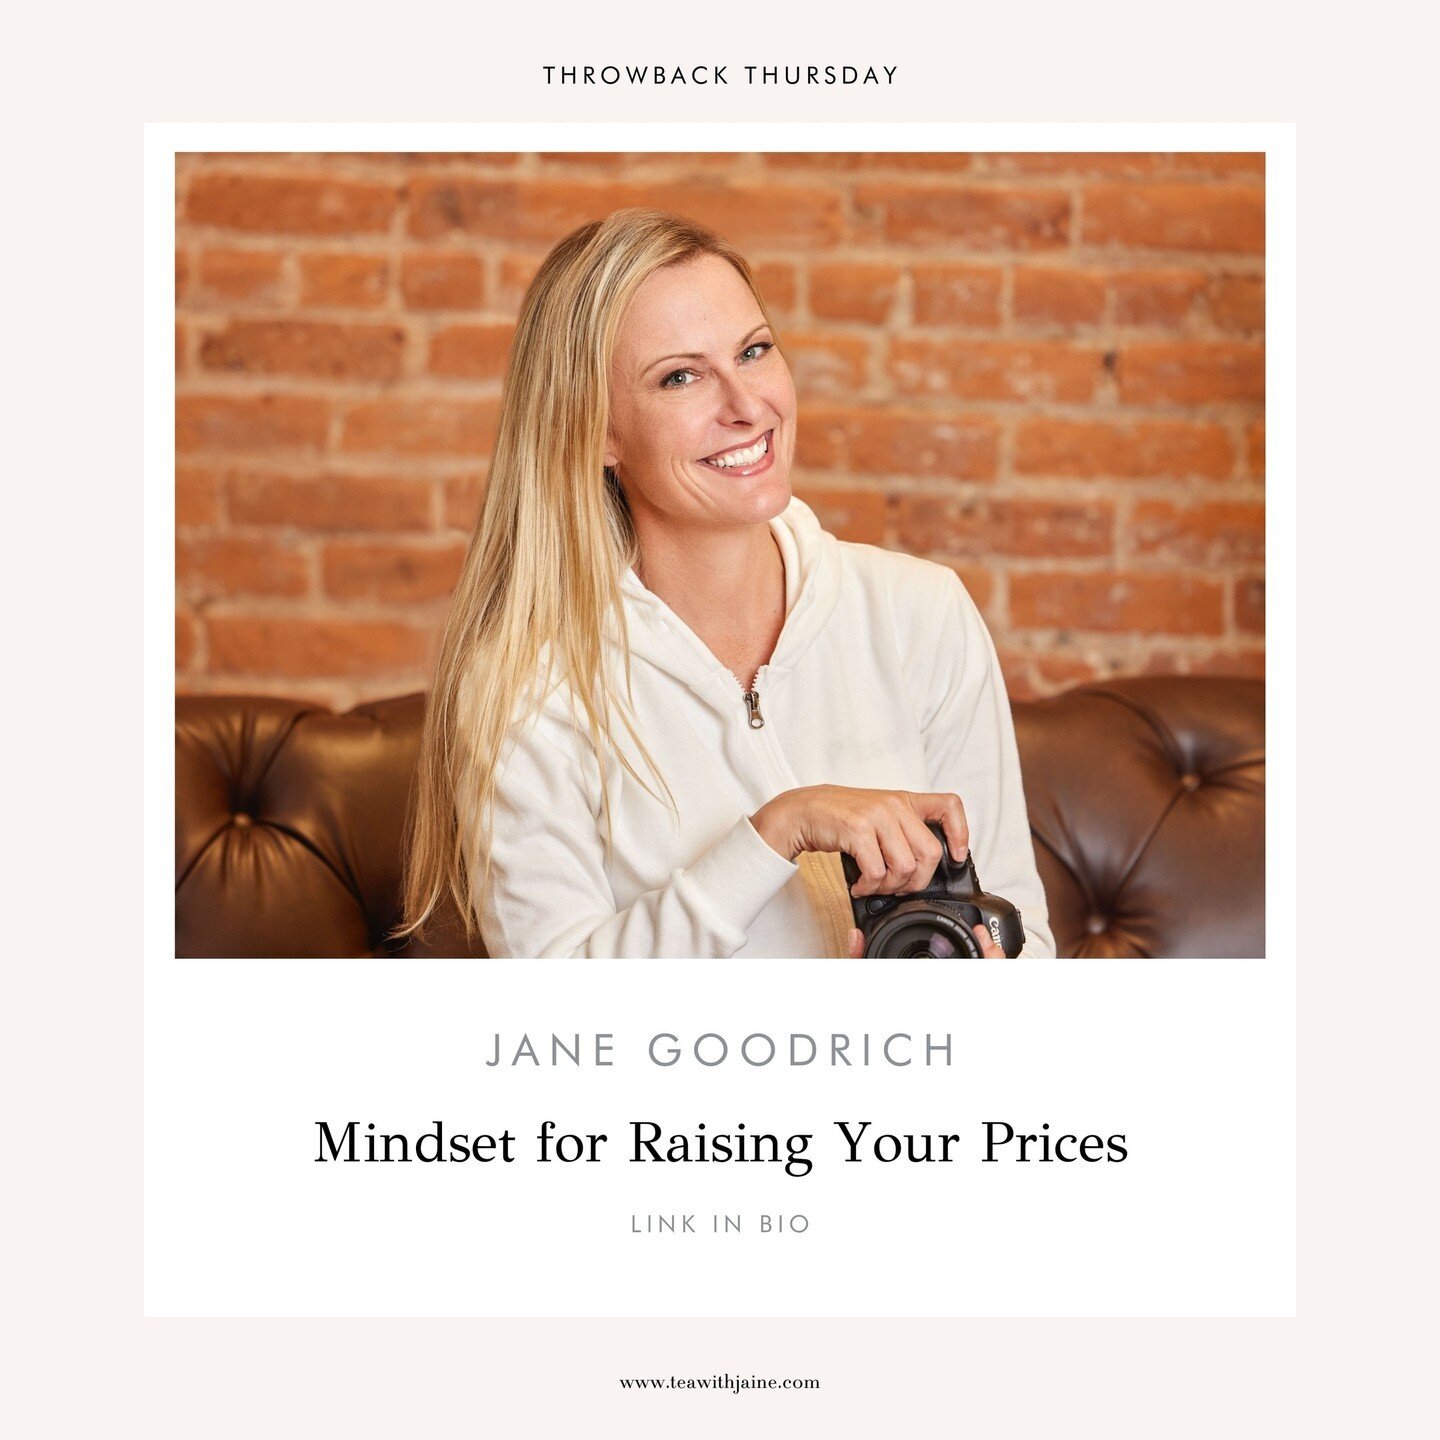 Are you scared to raise your prices? We got you!! 🔗 LINK IN BIO⁠
⁠
Today's #throwbackthursday ⁠is with Jane from @janegoodrichphotography. We chat all about how to use the power of mindset to help YOU increase your rates.⁠
⁠
Love the show? PLEASE he